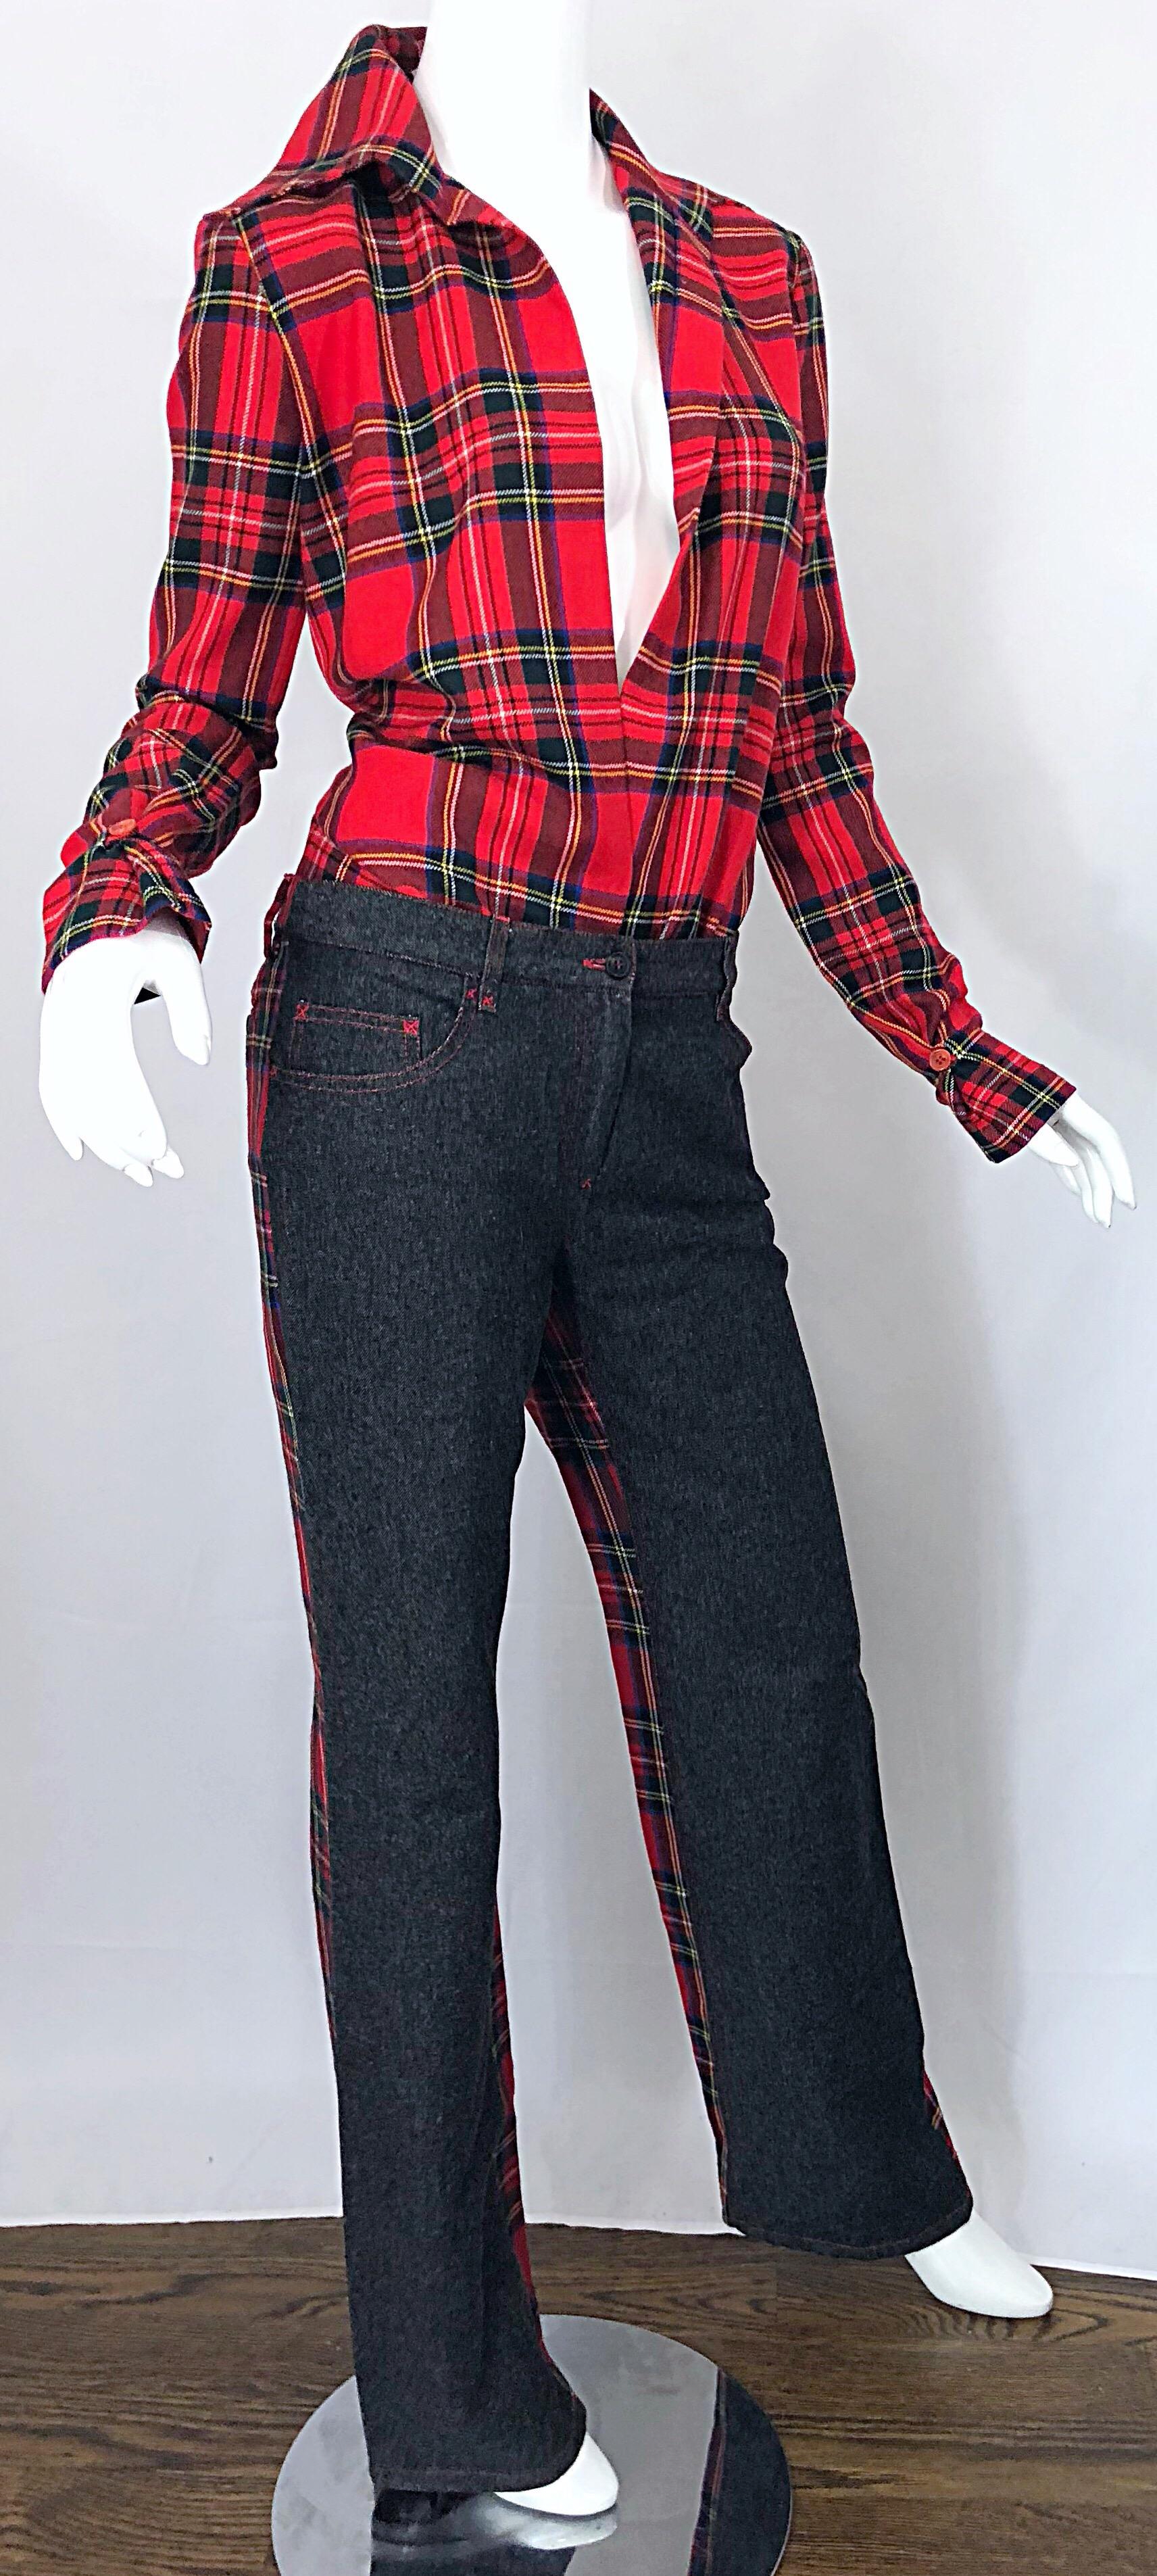 Rare 1990s Dolce & Gabbana Red Tartan Plaid Wool + Denim Flared Jeans and Shirt For Sale 2